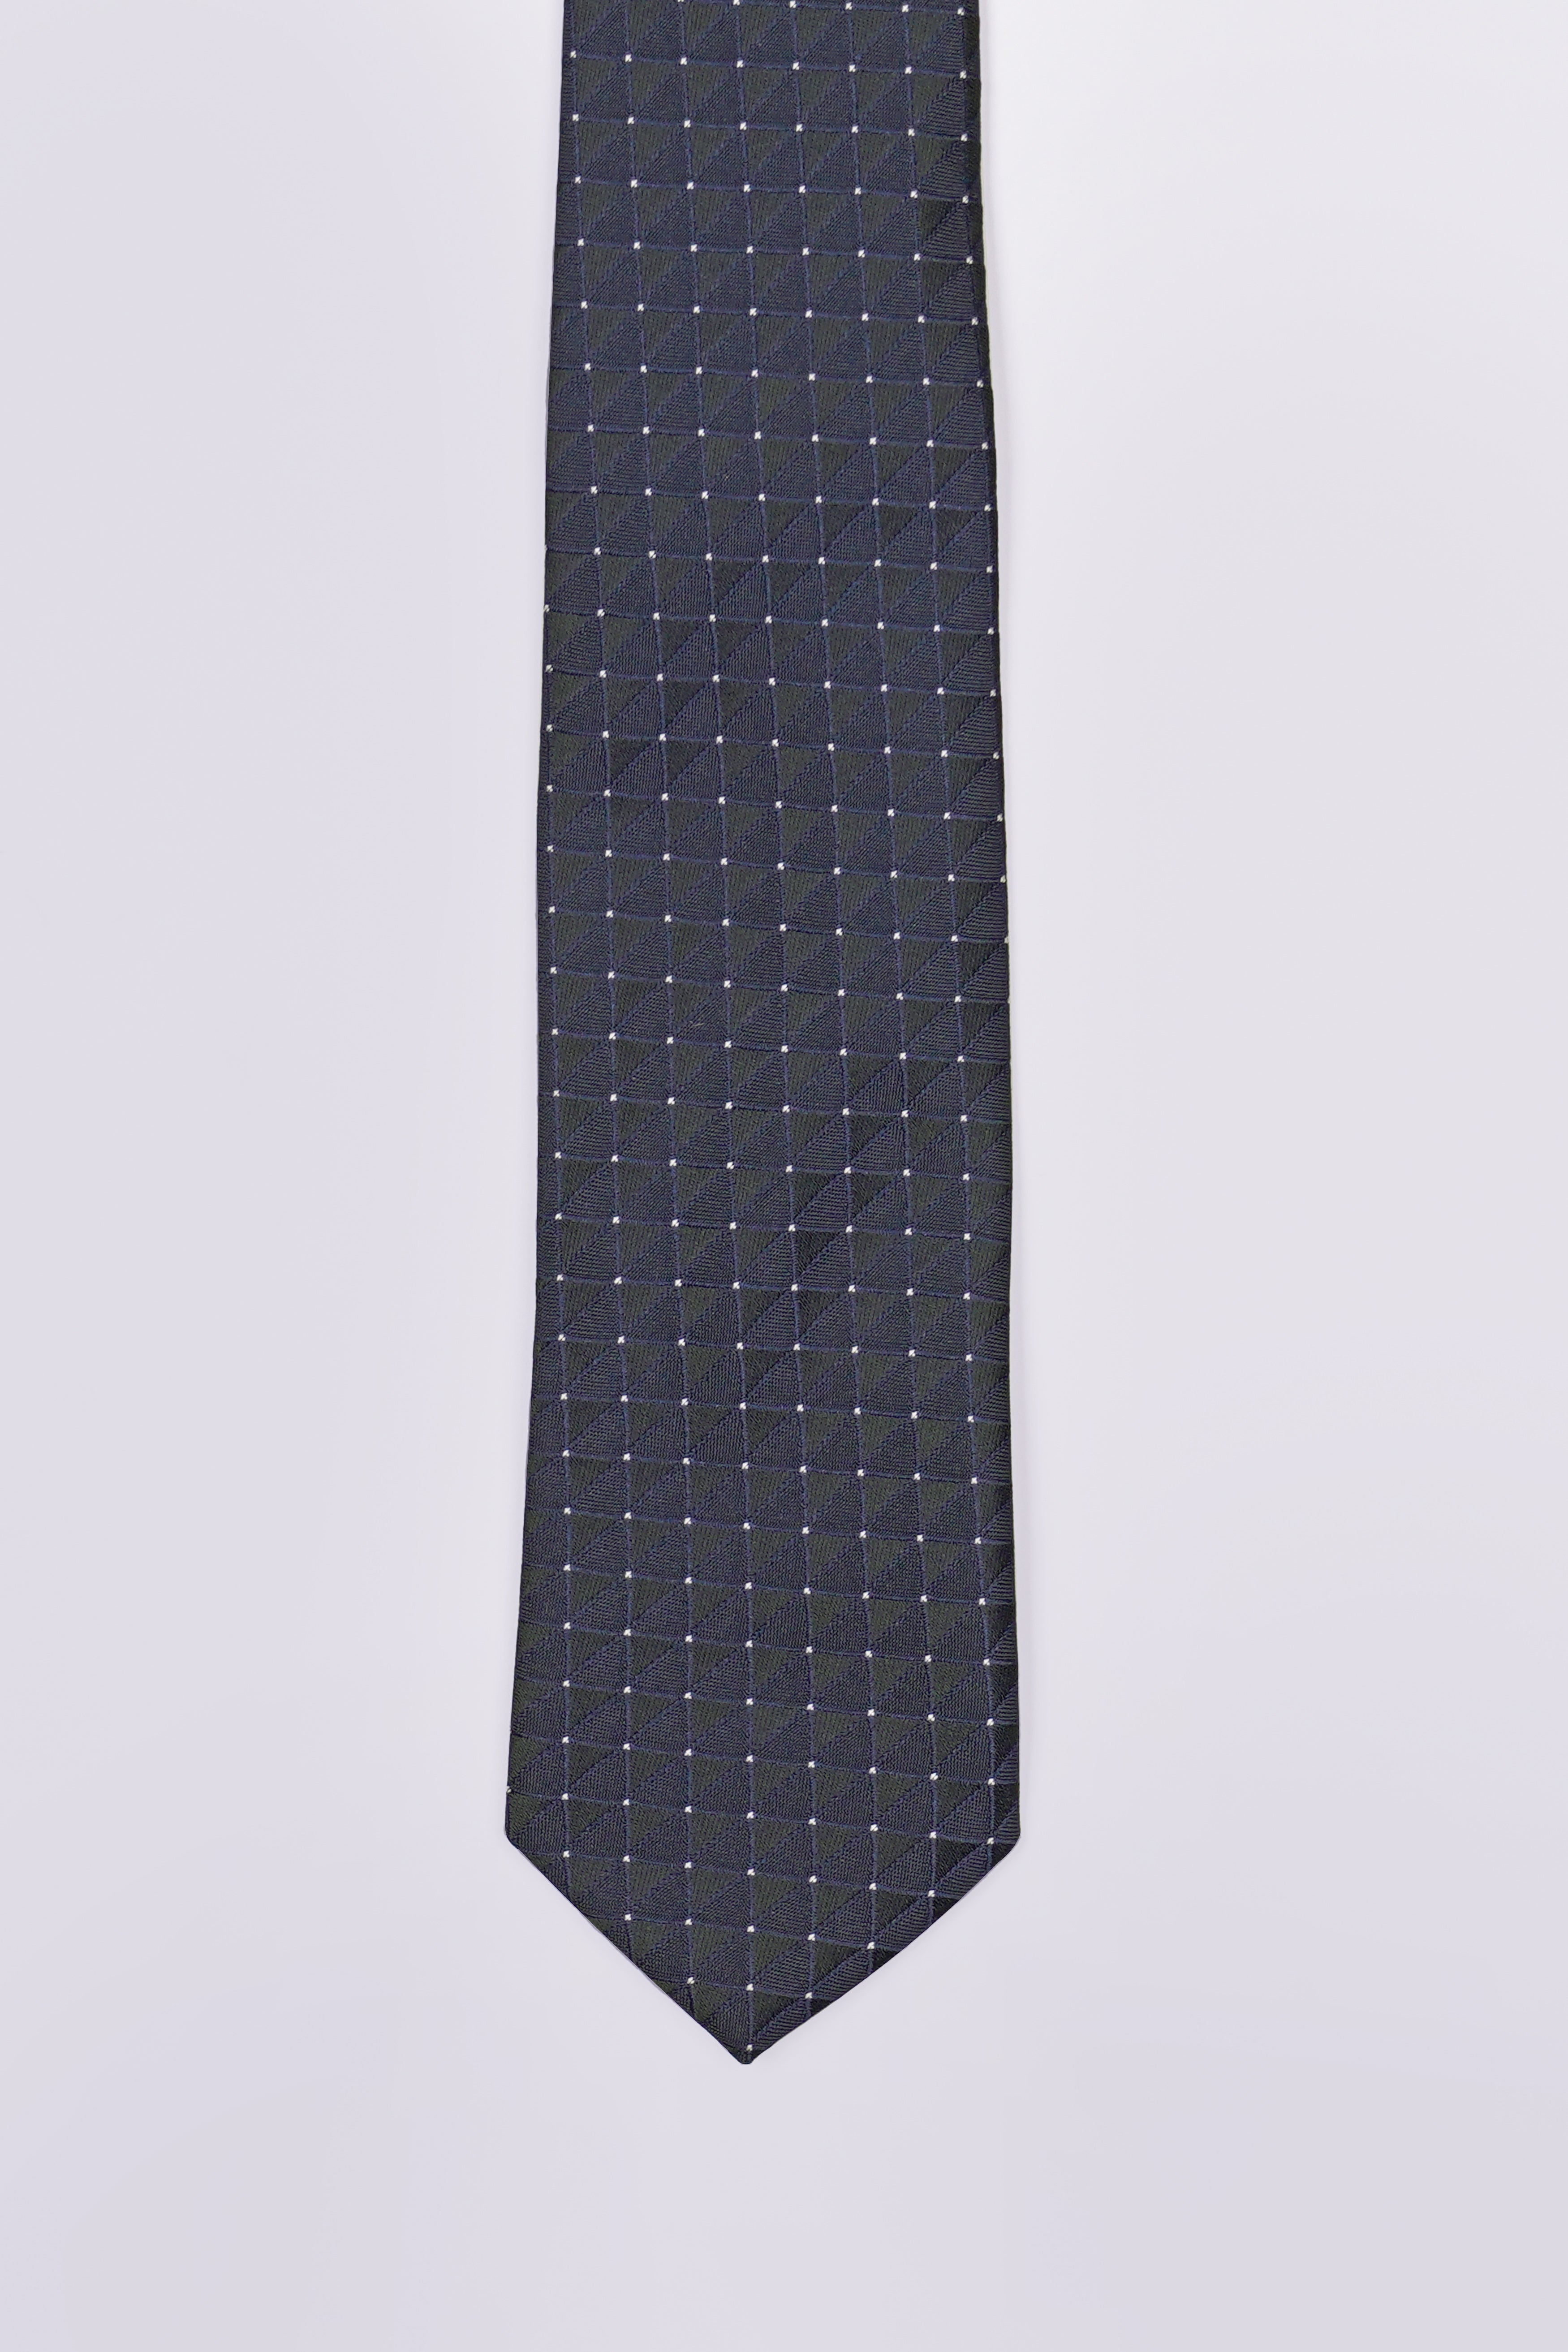 Mulled Wine Blue Checkered Jacquard Tie with Pocket Square TP070